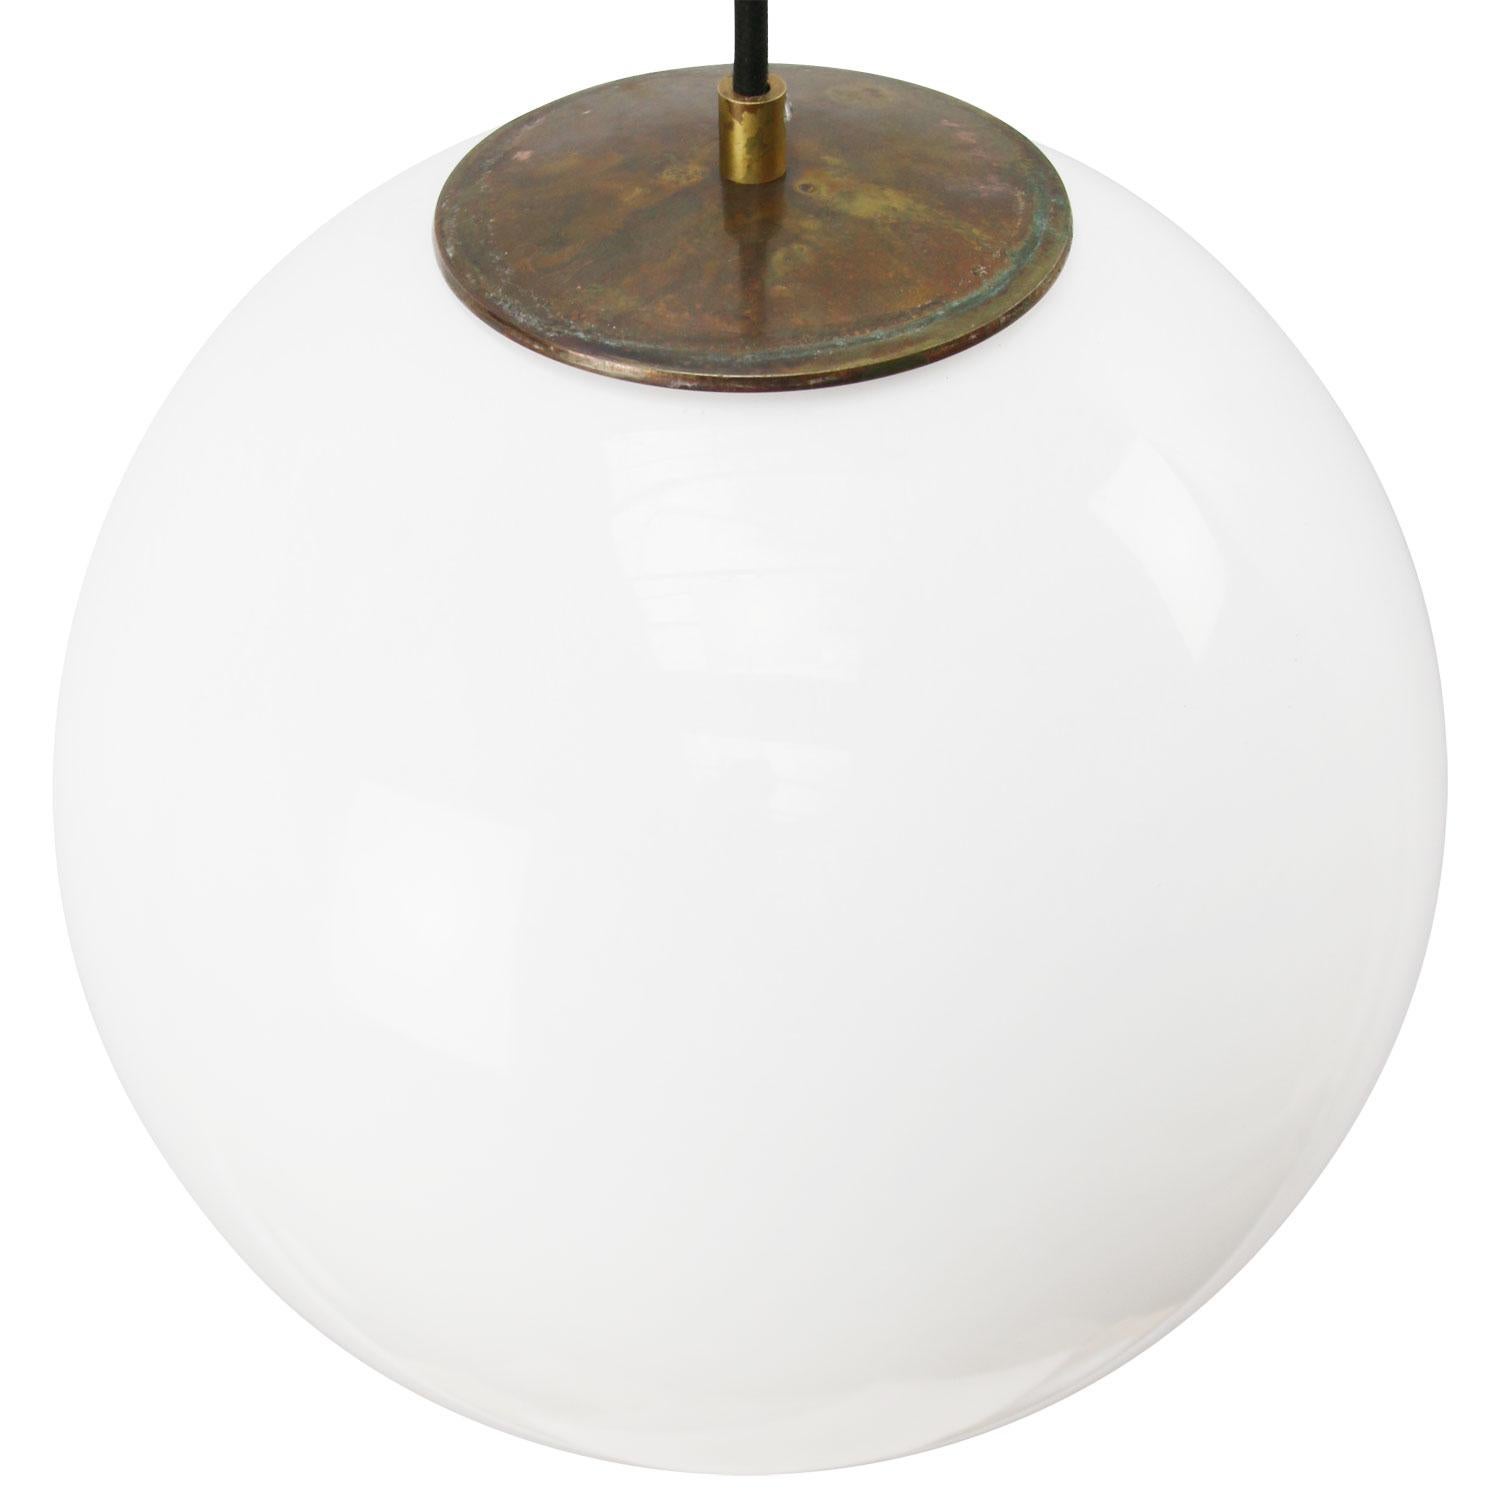 Large round opaline glass pendant
2 meter / 80